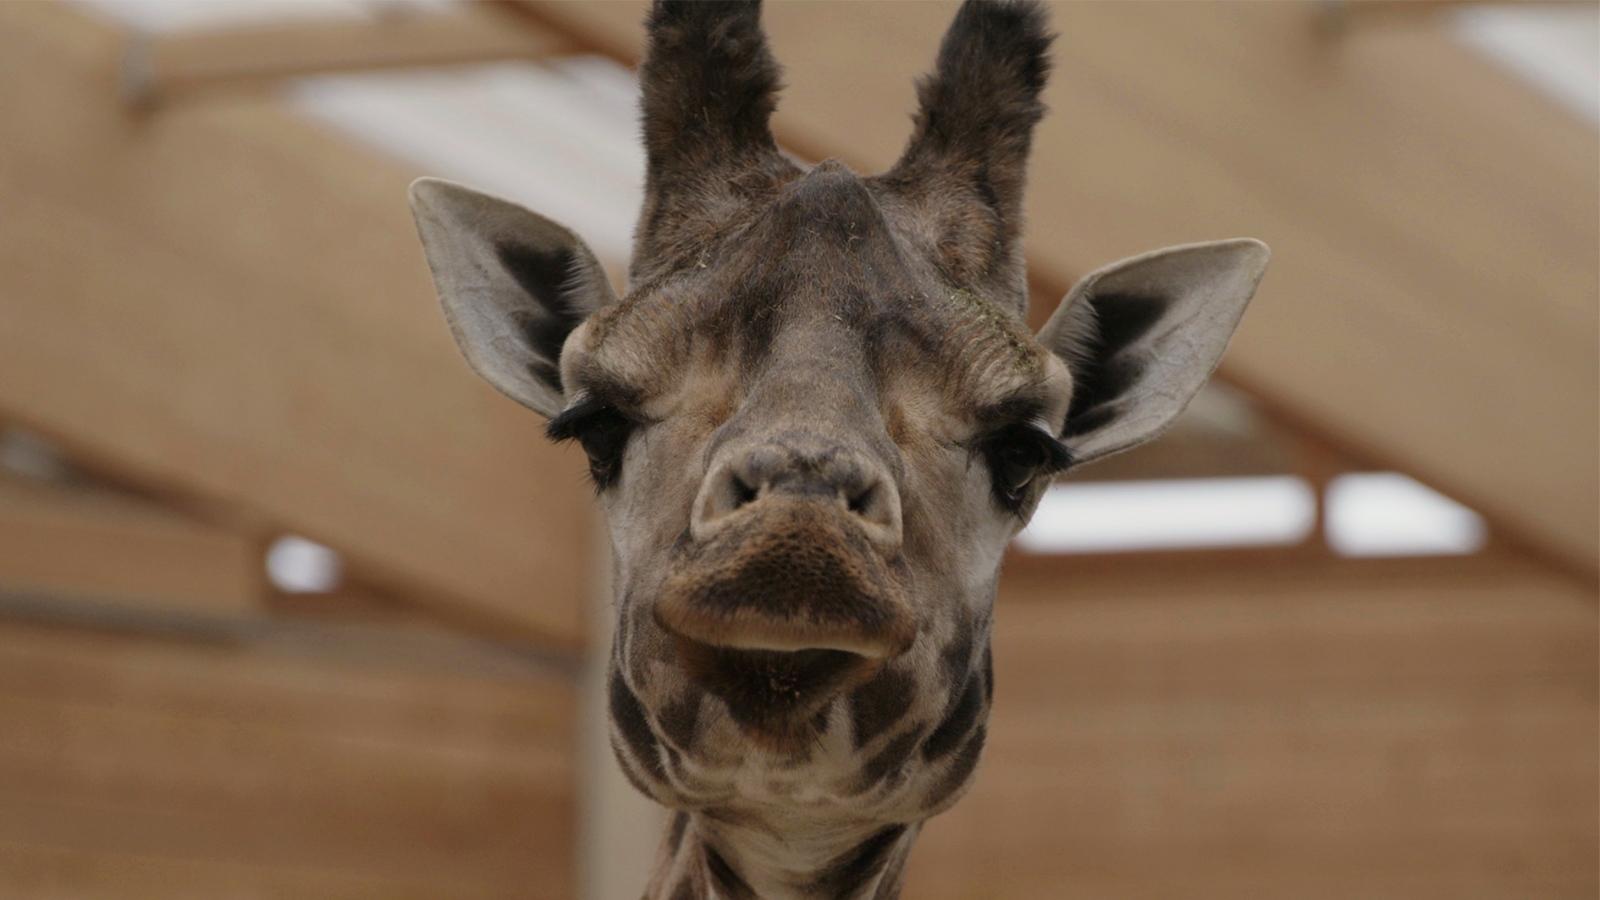 Still from Life and Other Problems, credit Jacob Sofussen. The Image is close up of a giraffe's face